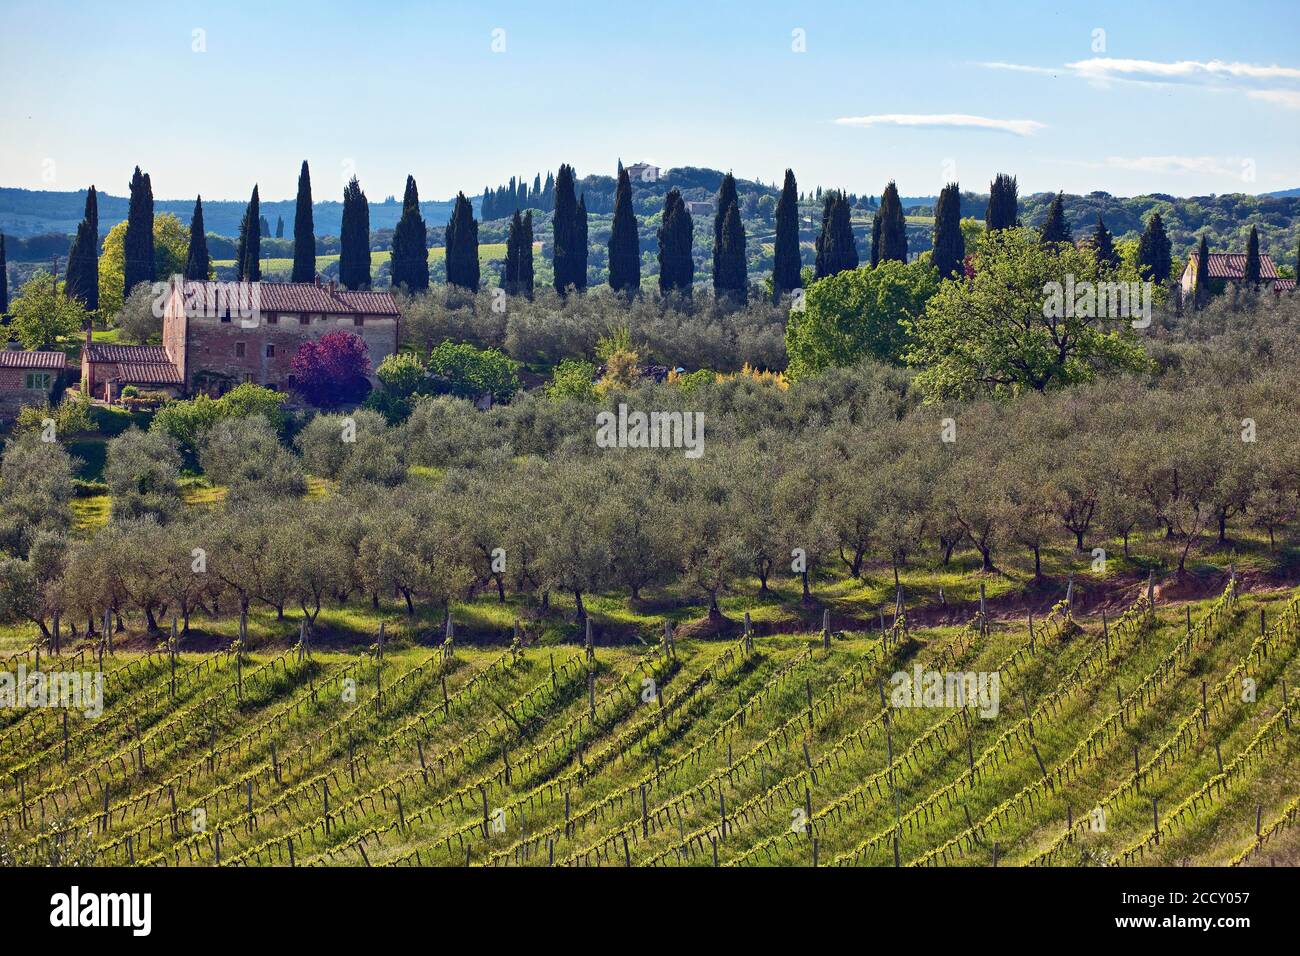 Landscape of Tuscany, wine (), olives (Olea europaea), cypresses (Cupressus sempervirens), vines, vineyard, Chianti, olive grove, Tuscany, Italy Stock Photo